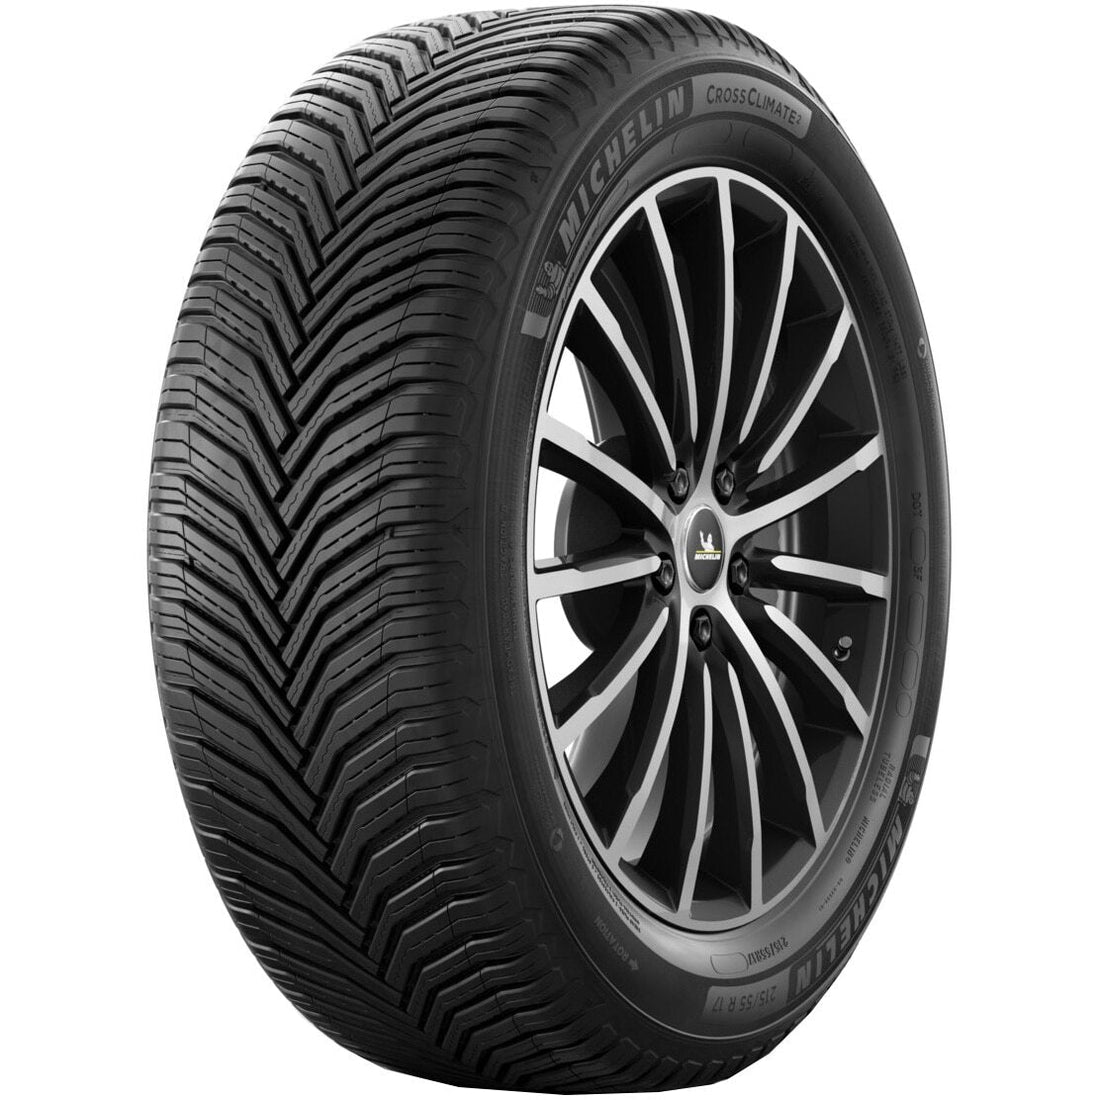 Anvelope All-season Michelin Crossclimate 2 xl s1 205/55R19 97=730kgV=240 km/h Anvelux